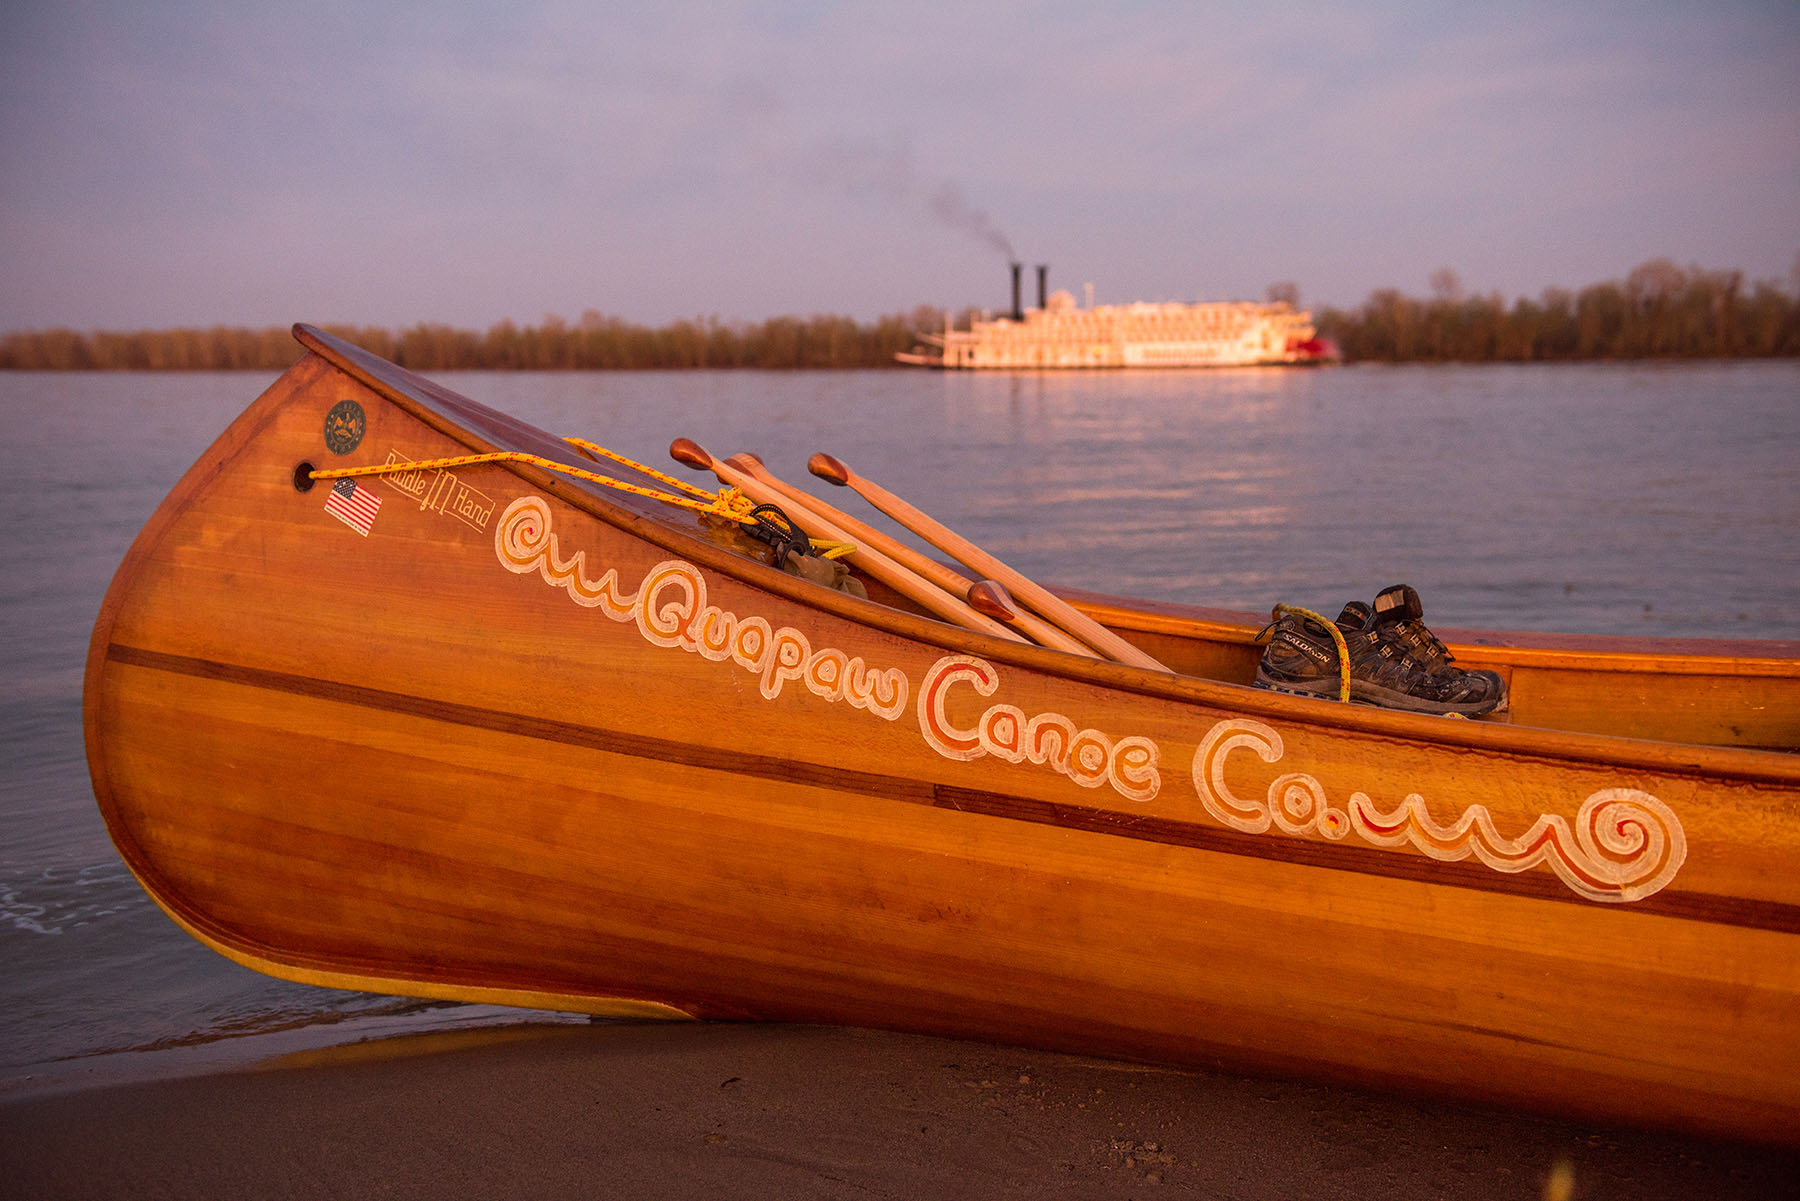 One of Ruskey's Quapaw Canoes